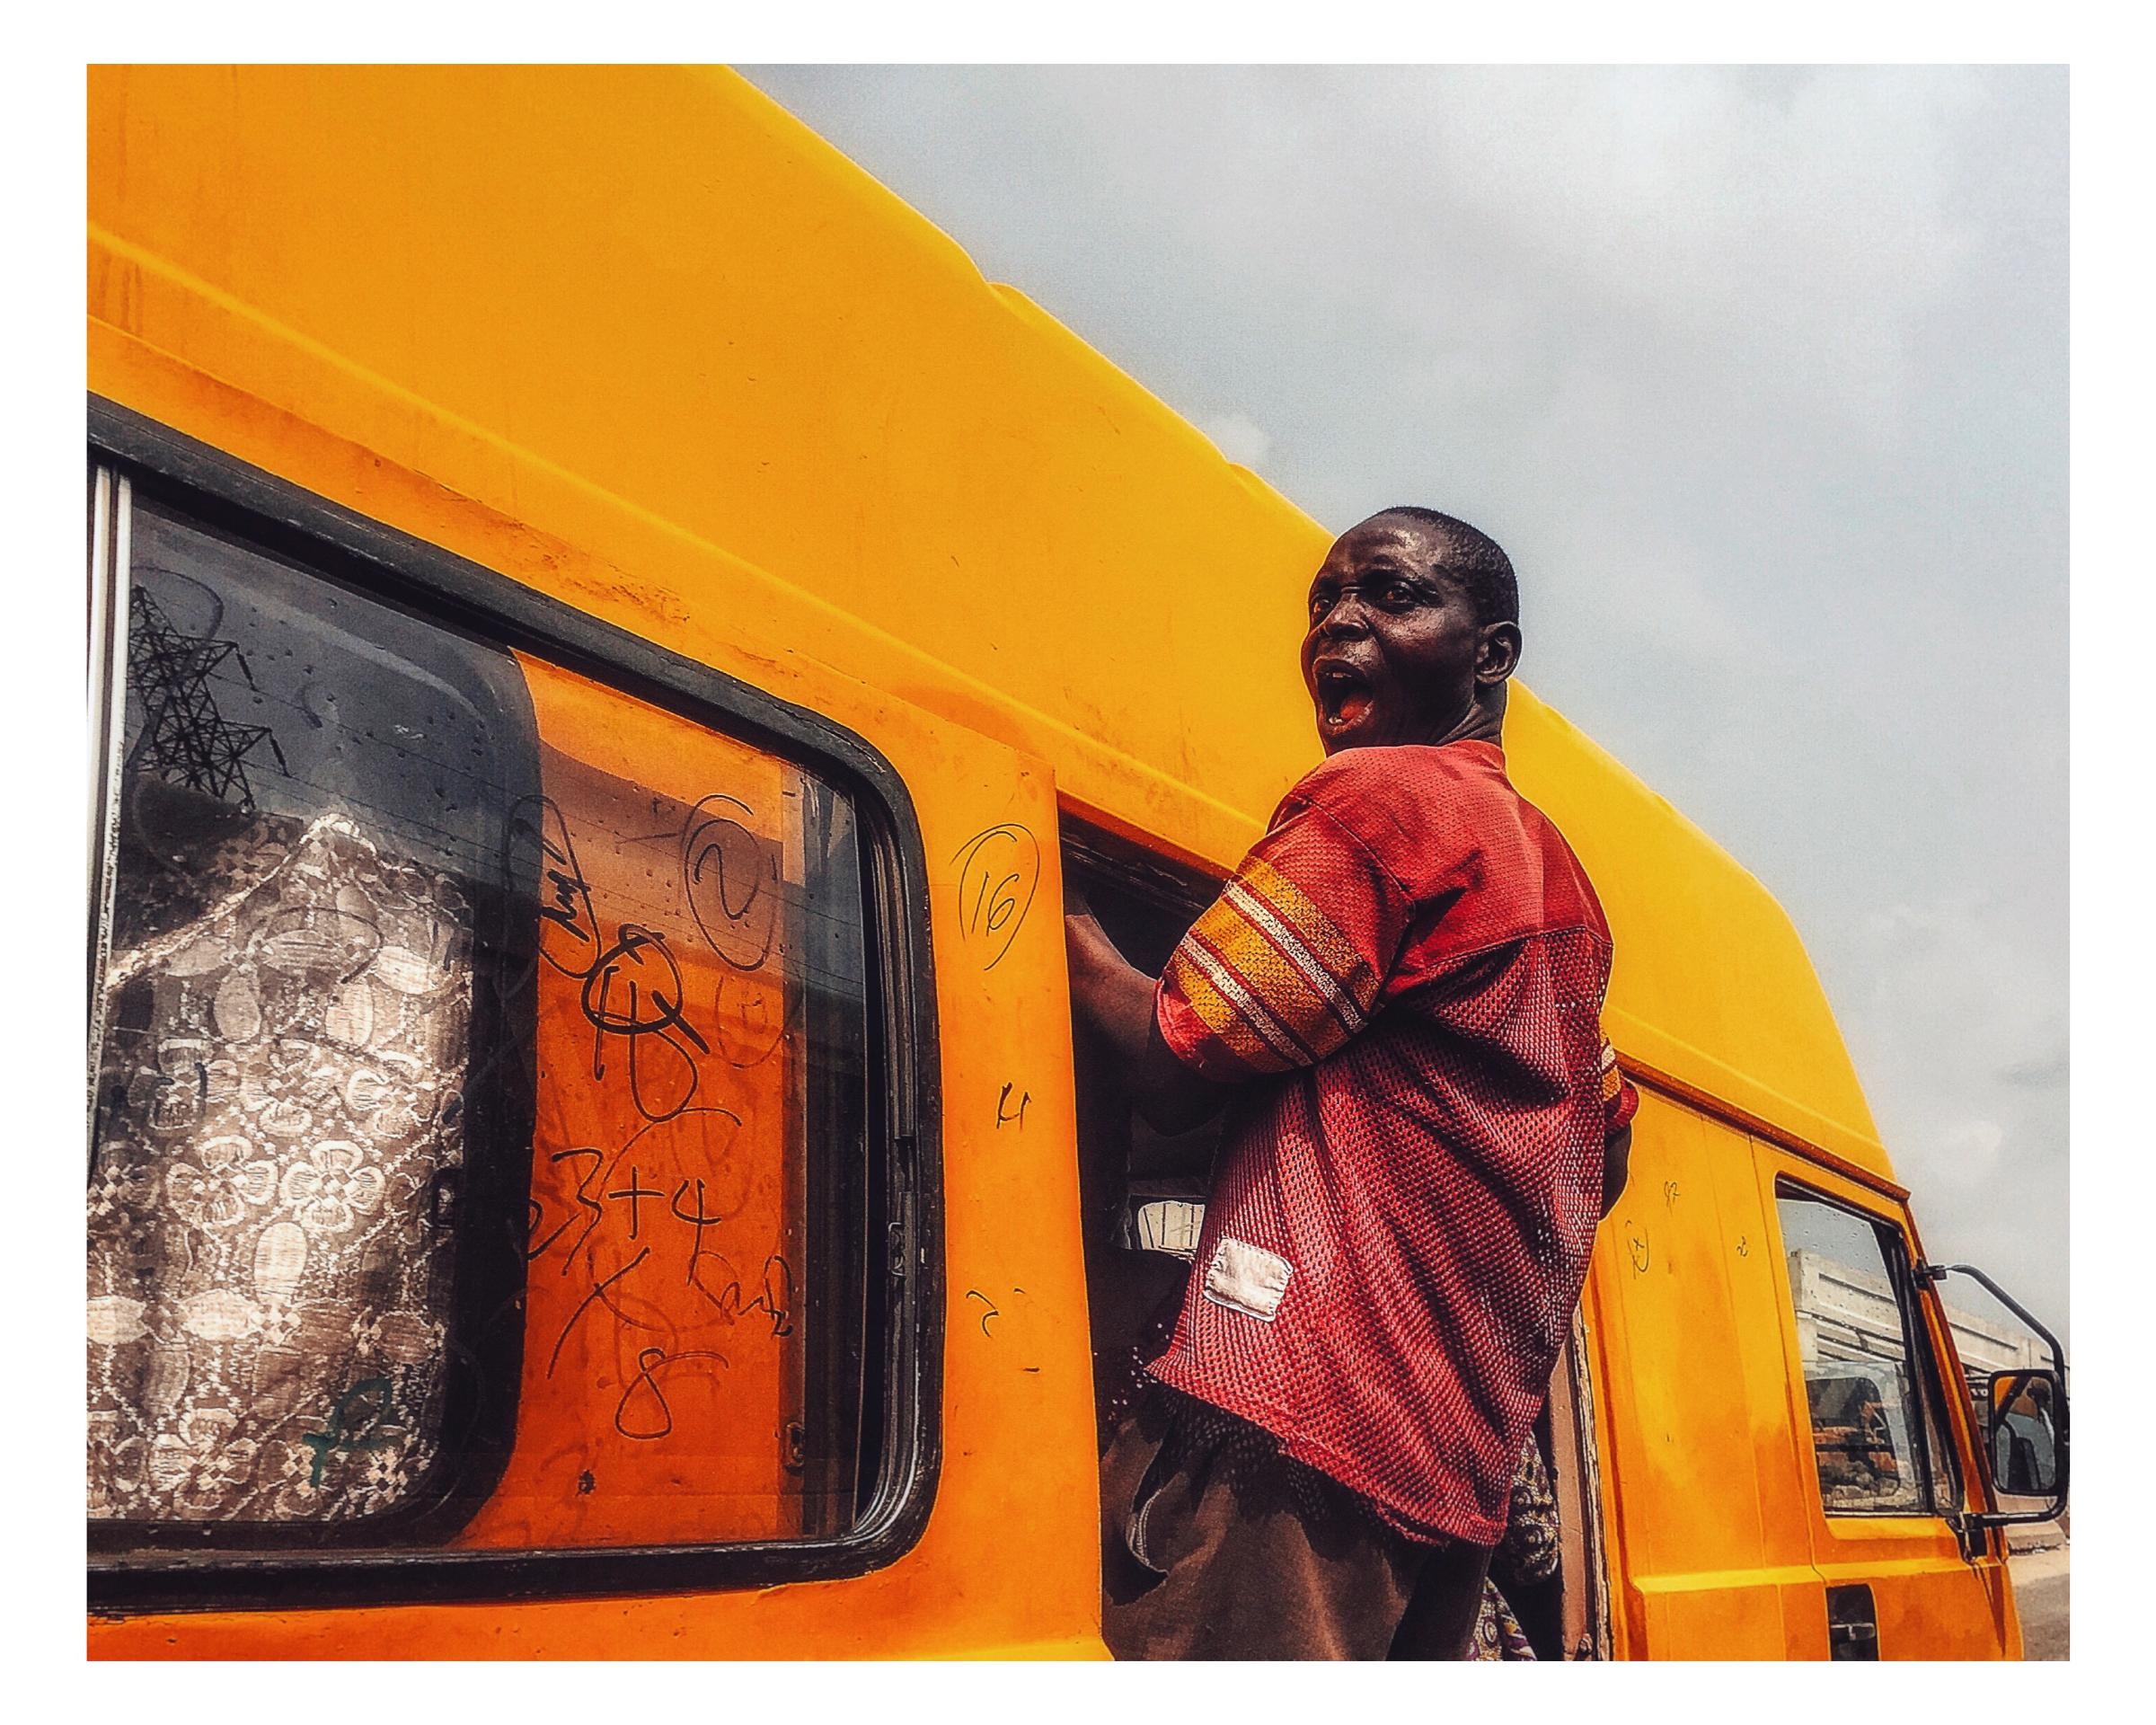 LagosLivesOn: A portrait of a bus conductor in action